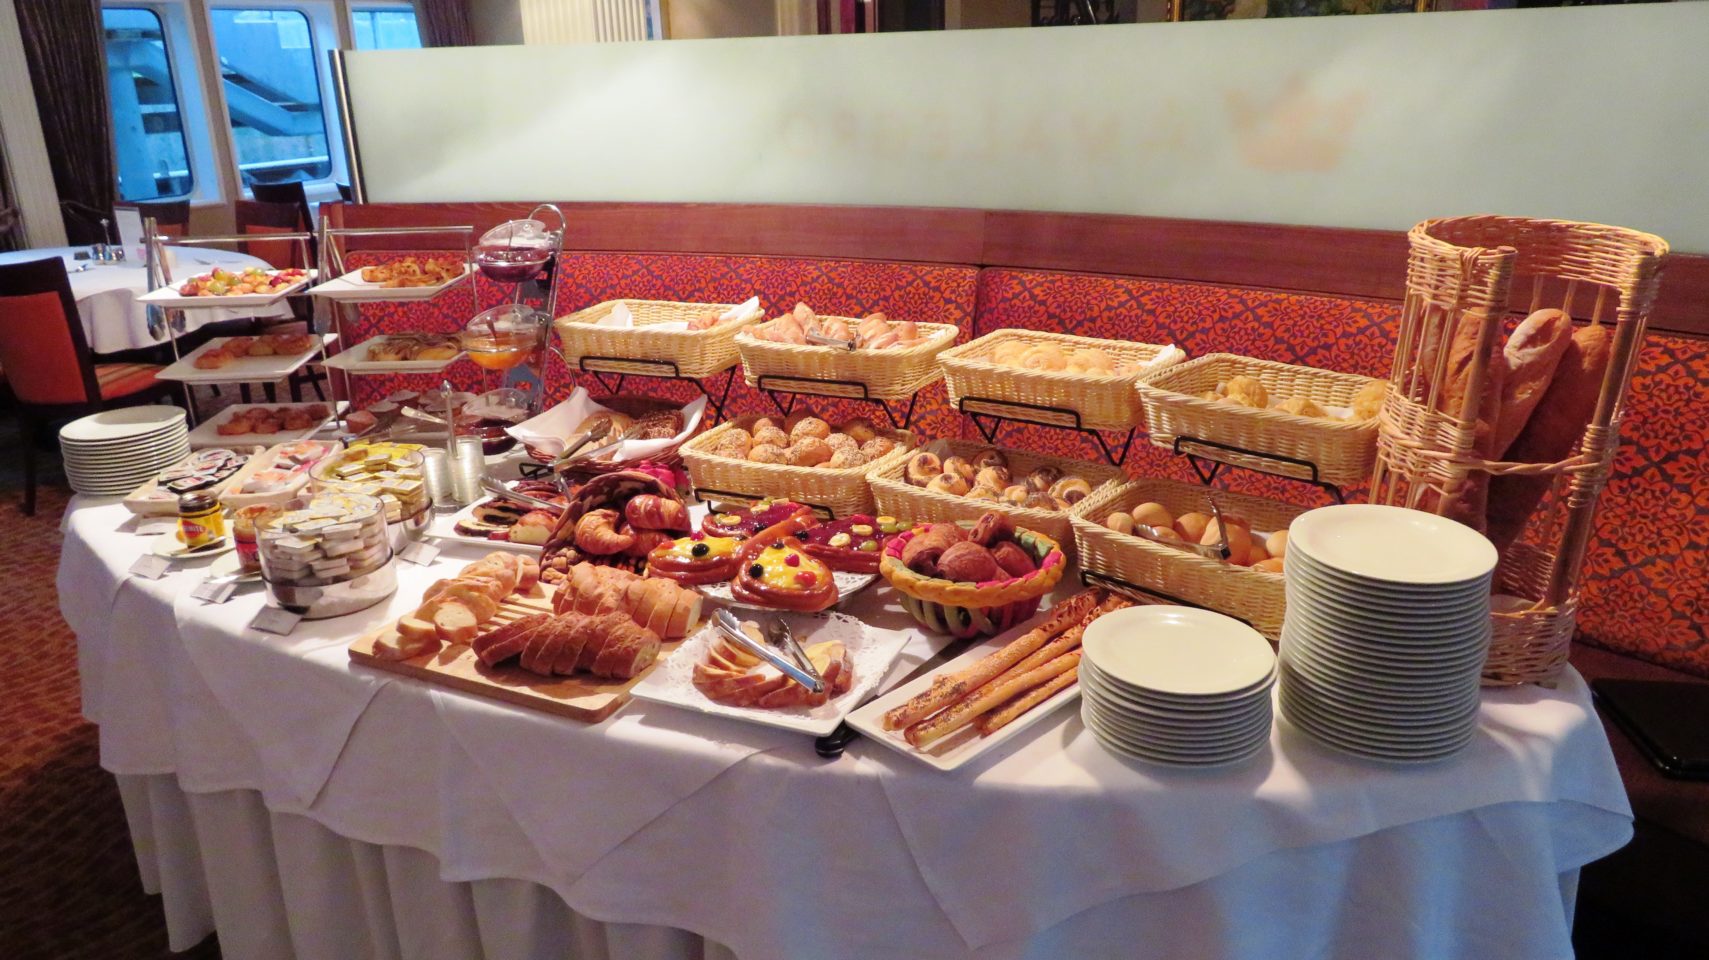 The Bread Table section of the breakfast buffet aboard the AMALegro (Paris and Normandie AMAWaterways Cruise)